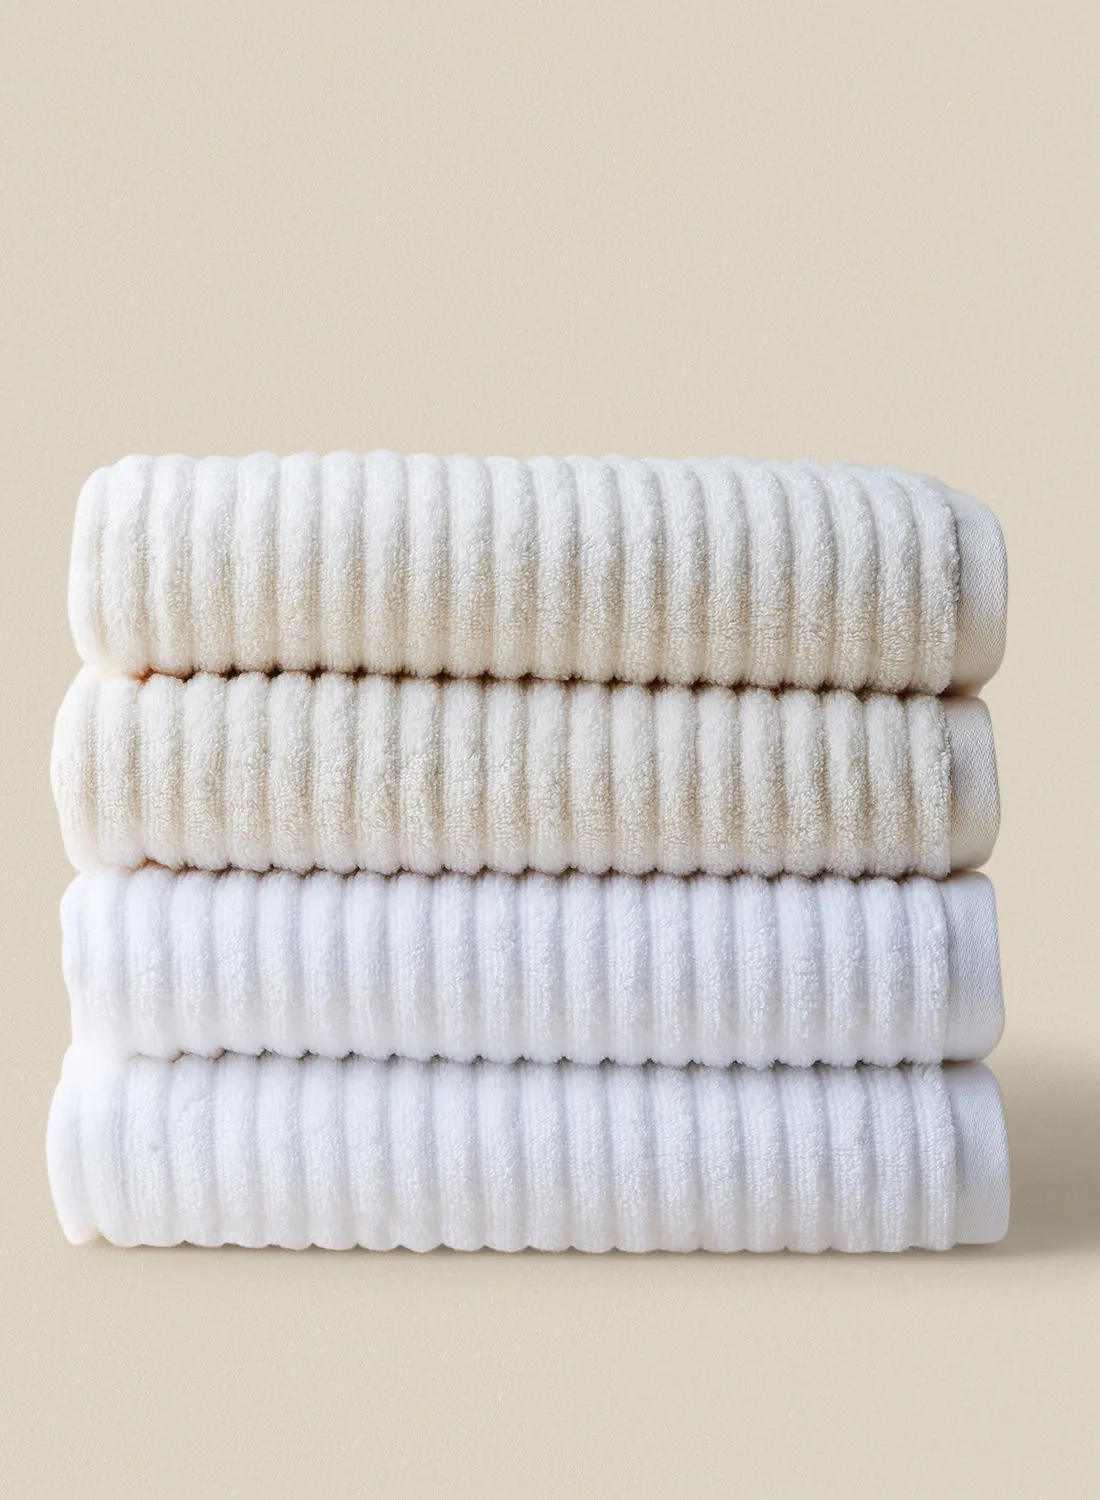 noon east 4 Piece Bathroom Towel Set - 450 GSM 100% Cotton Ribbed - 4 Bath Towel - Multicolor Natural/White Color - Highly Absorbent - Fast Dry